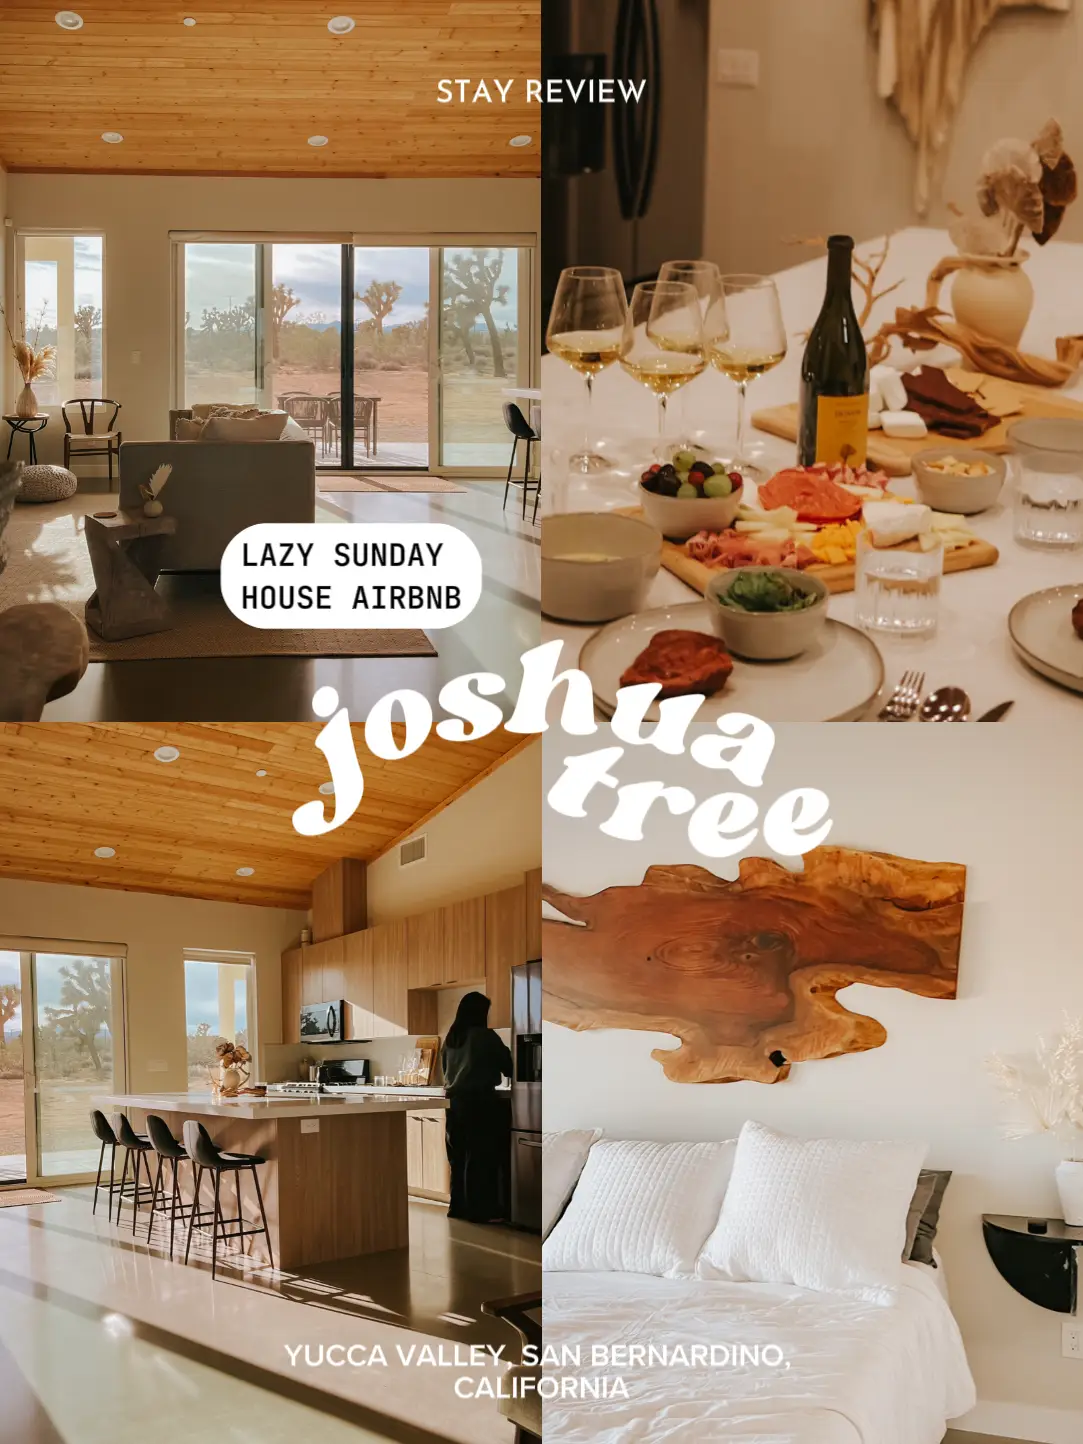 JOSHUA TREE NP | Stay Review: "Lazy Sunday House"'s images